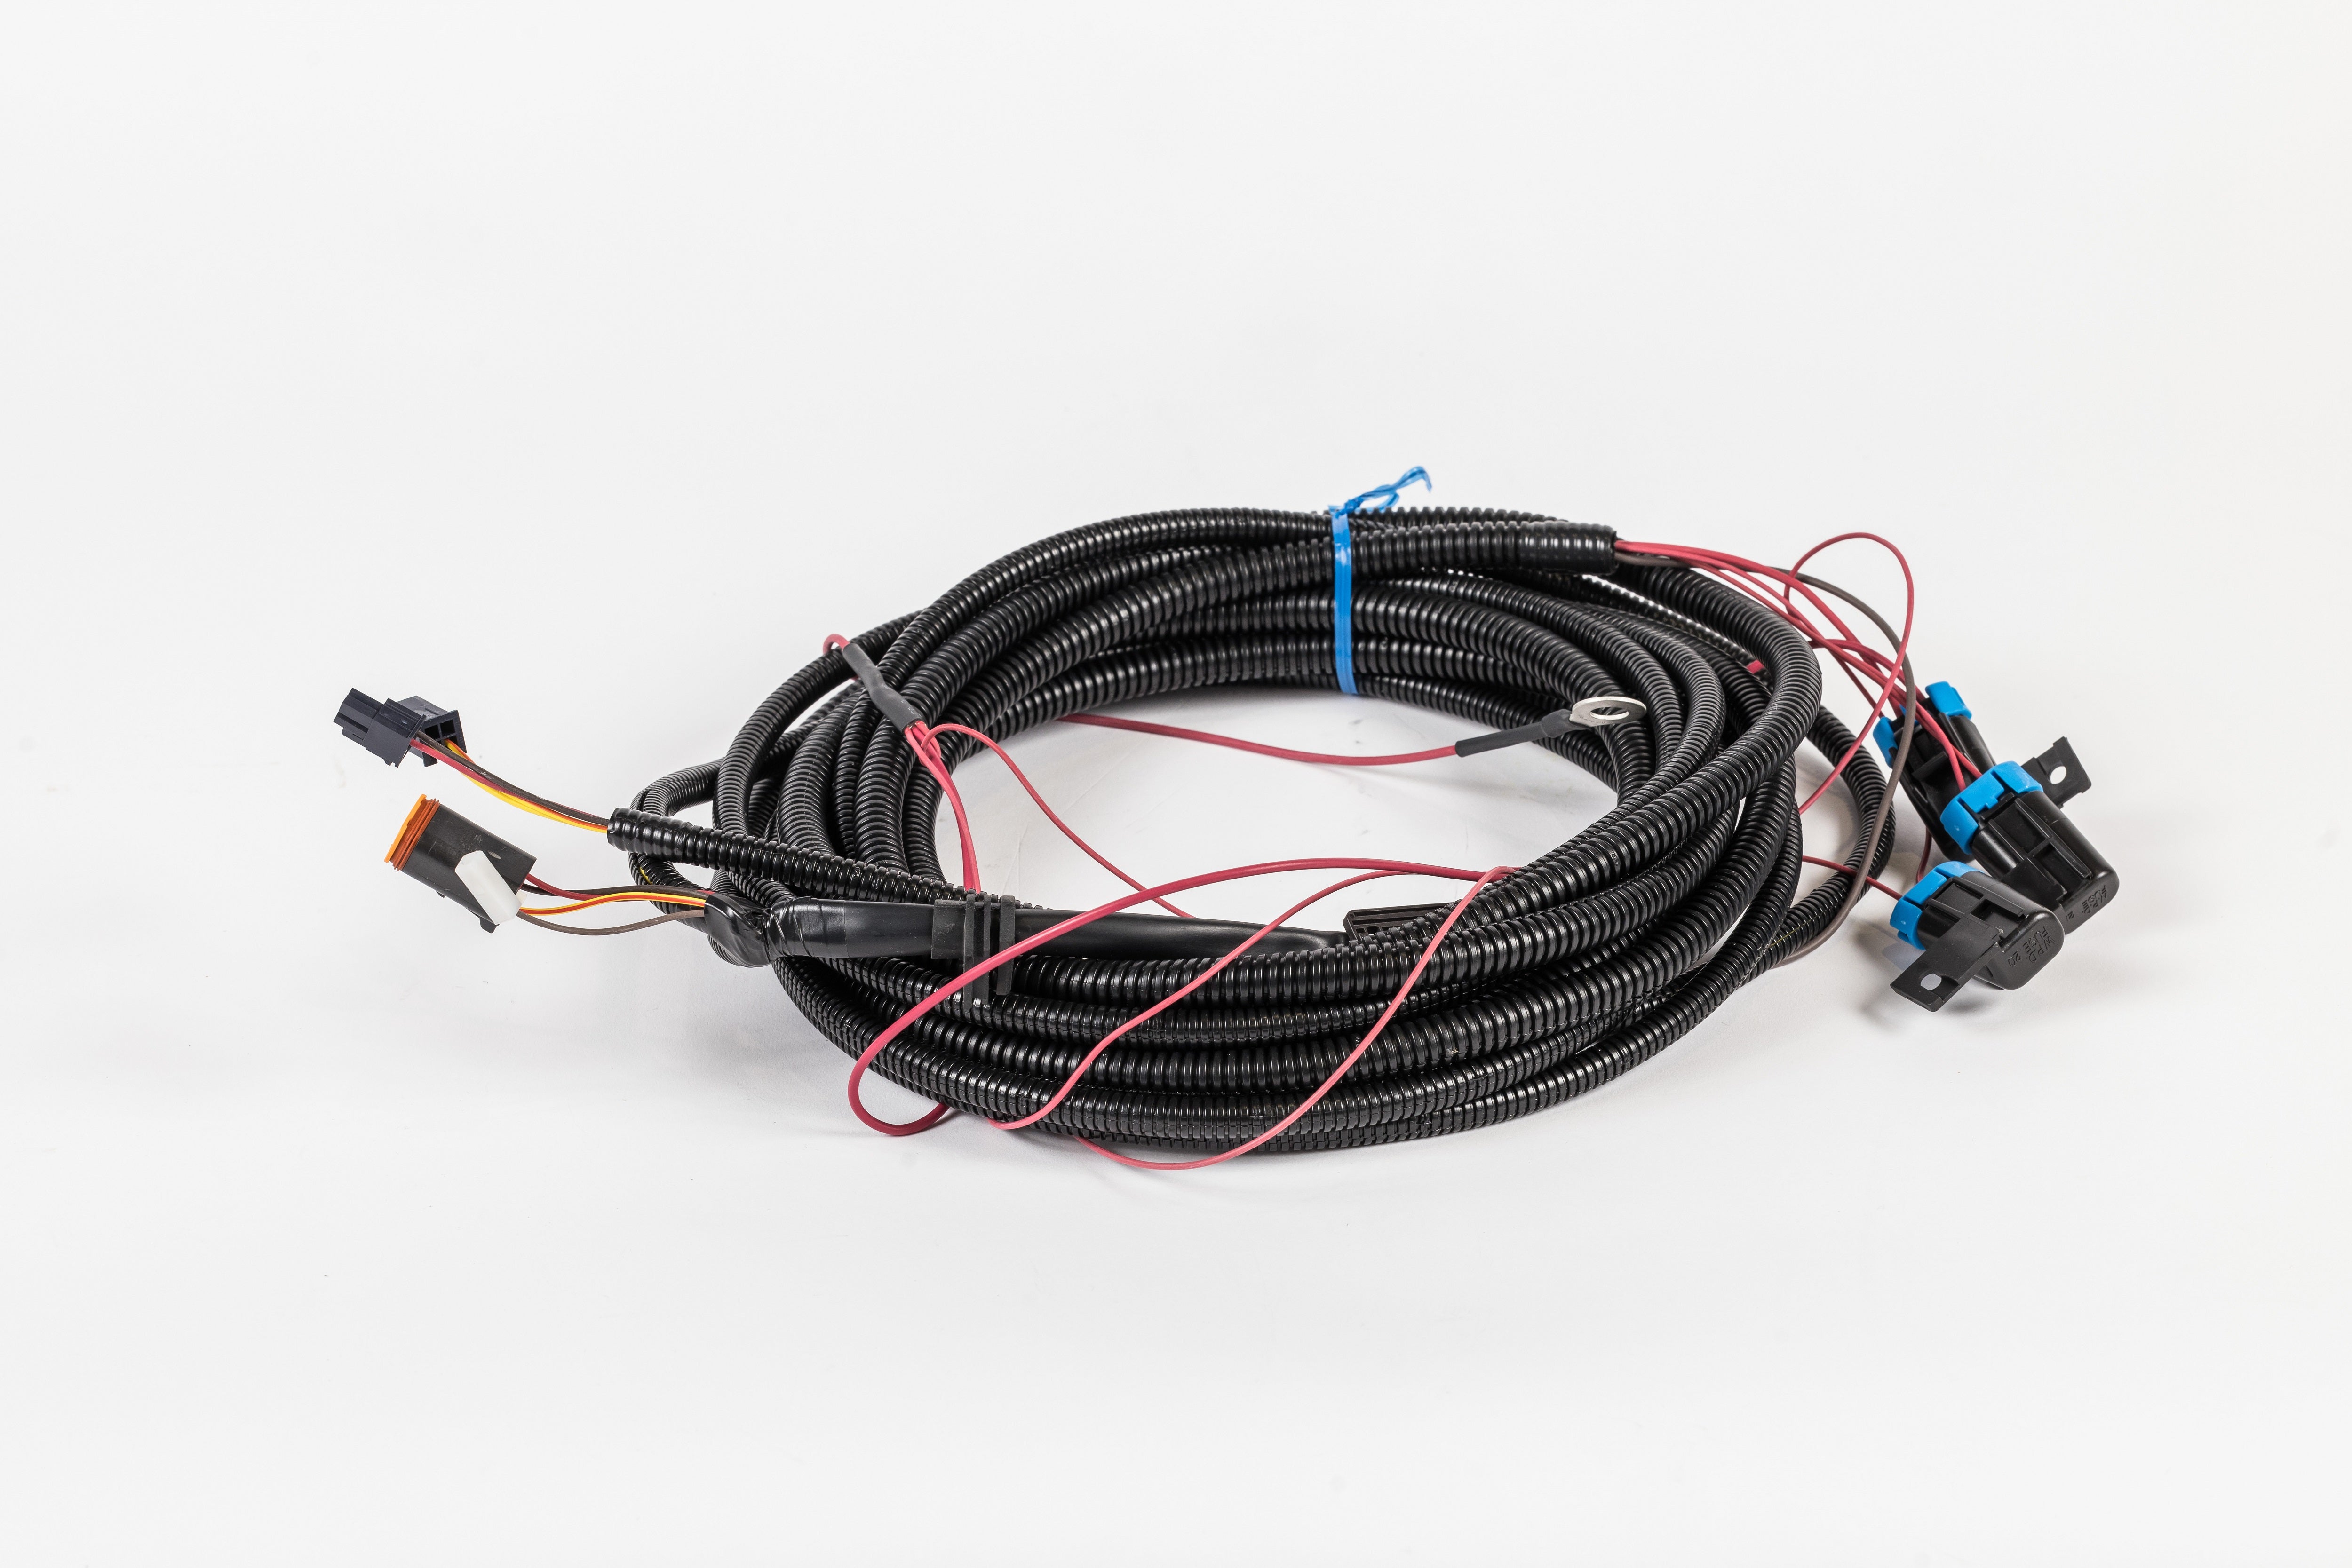 Webasto Wiring Harness Complete For Smartemp 3.0 Airtop 2000Stc 5013887A Heater Part